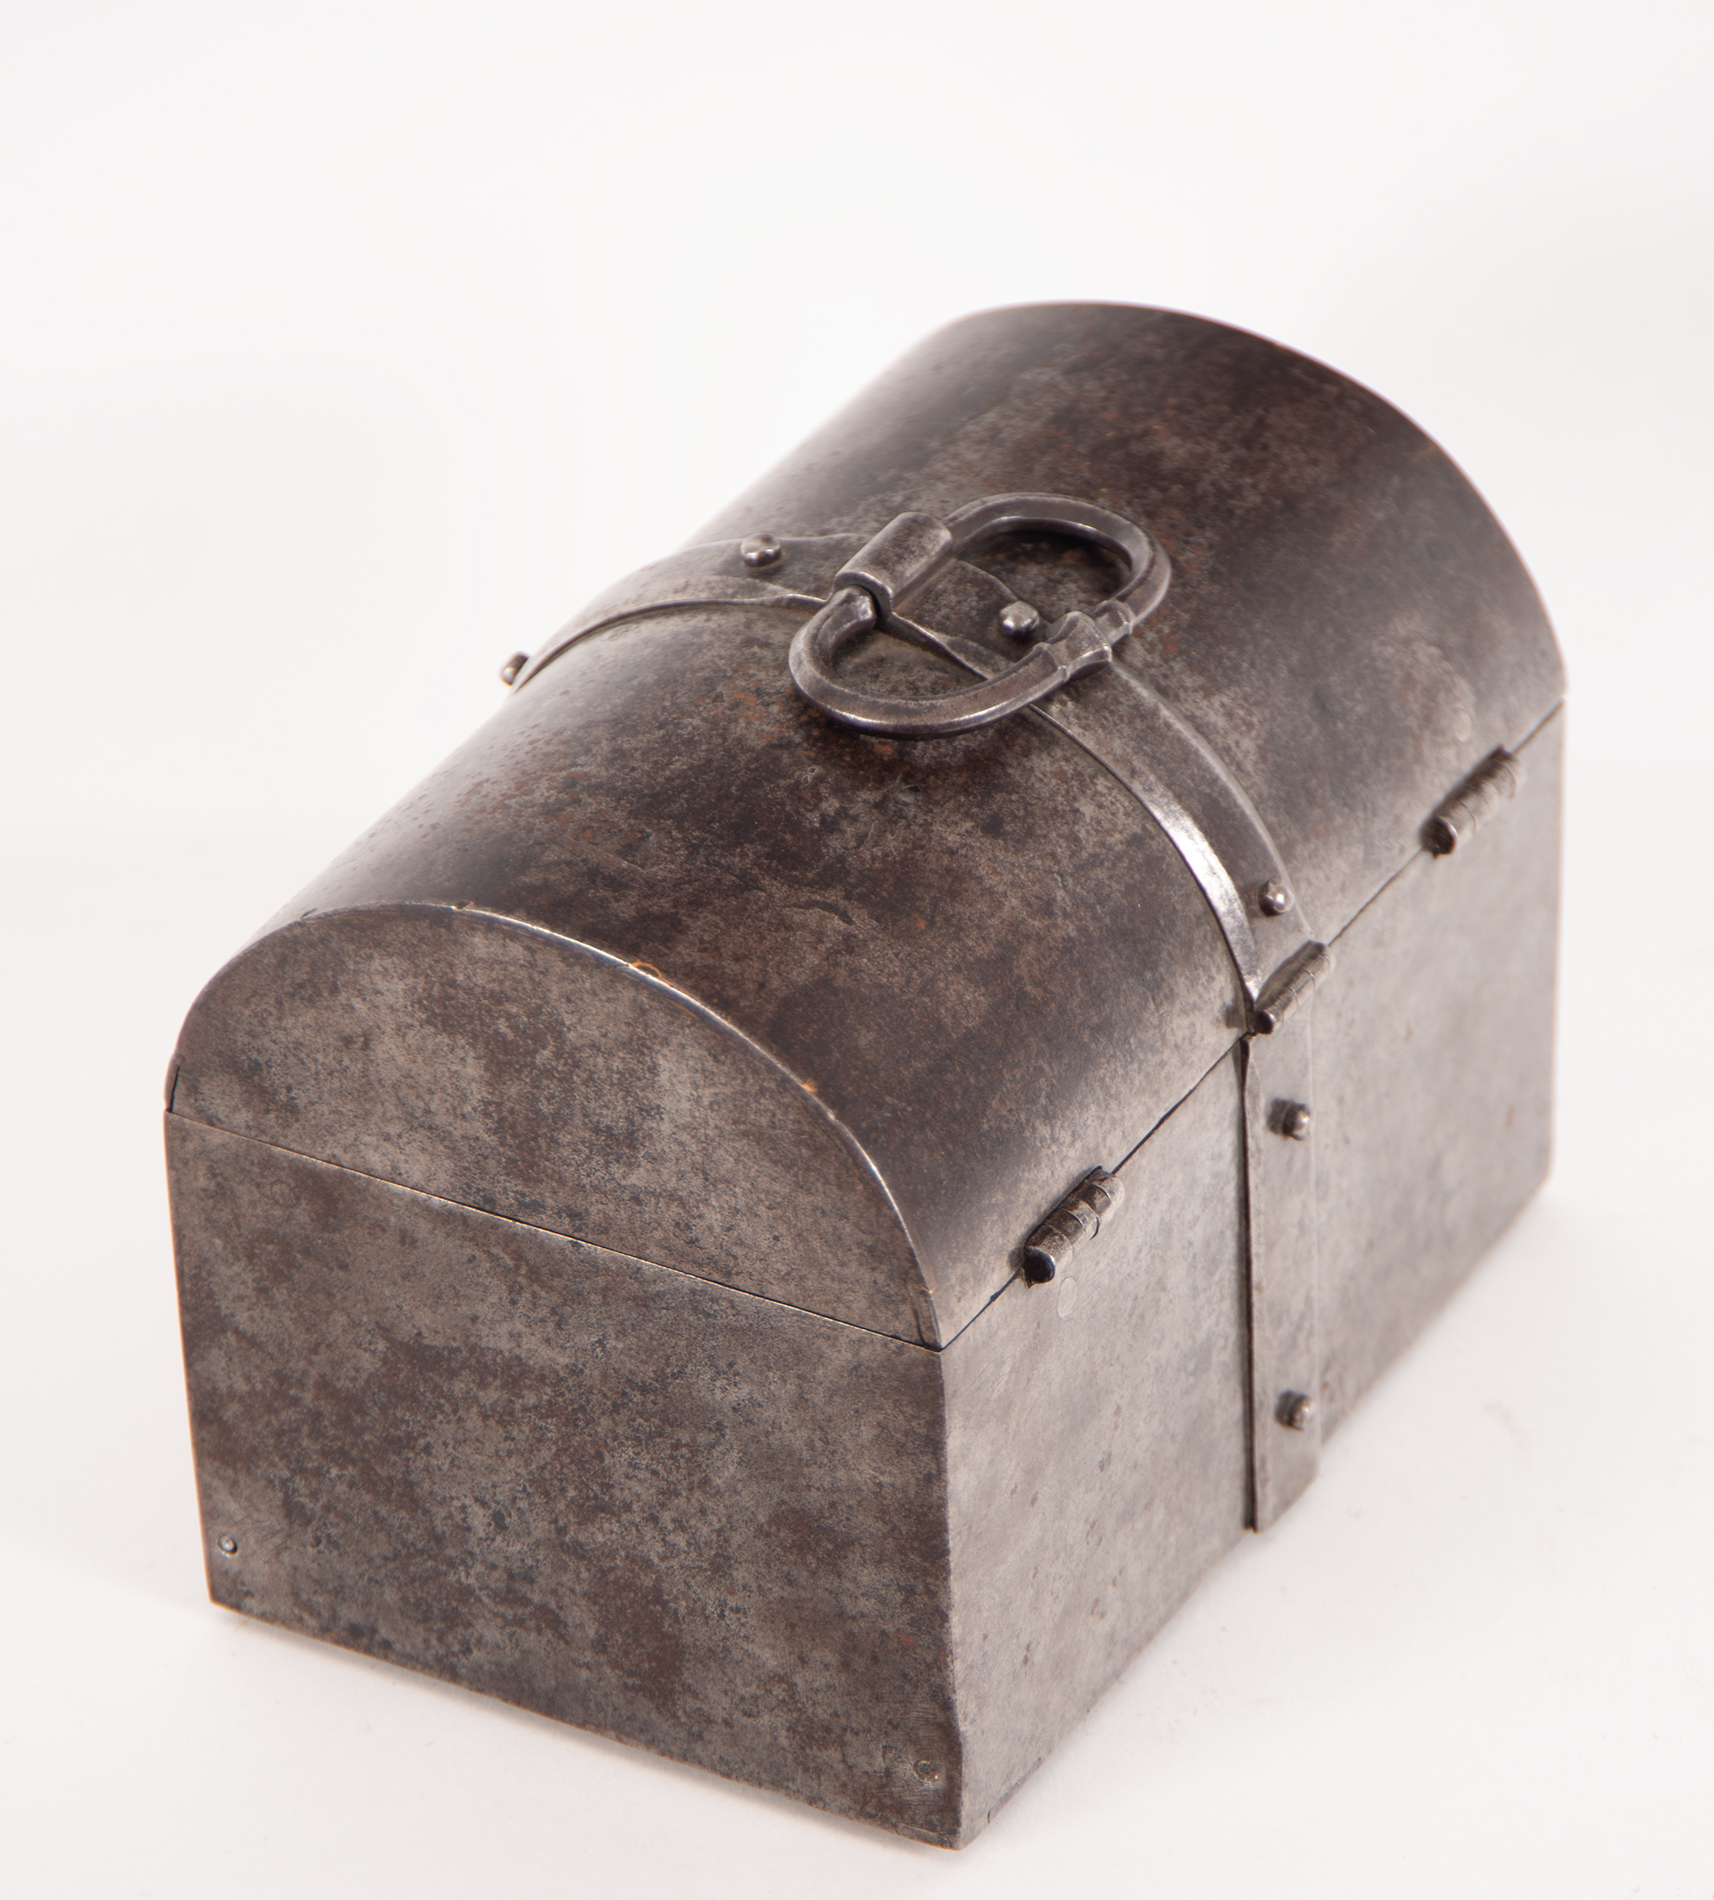 Cash box in forge, Nuremberg, 16th century - Image 4 of 6